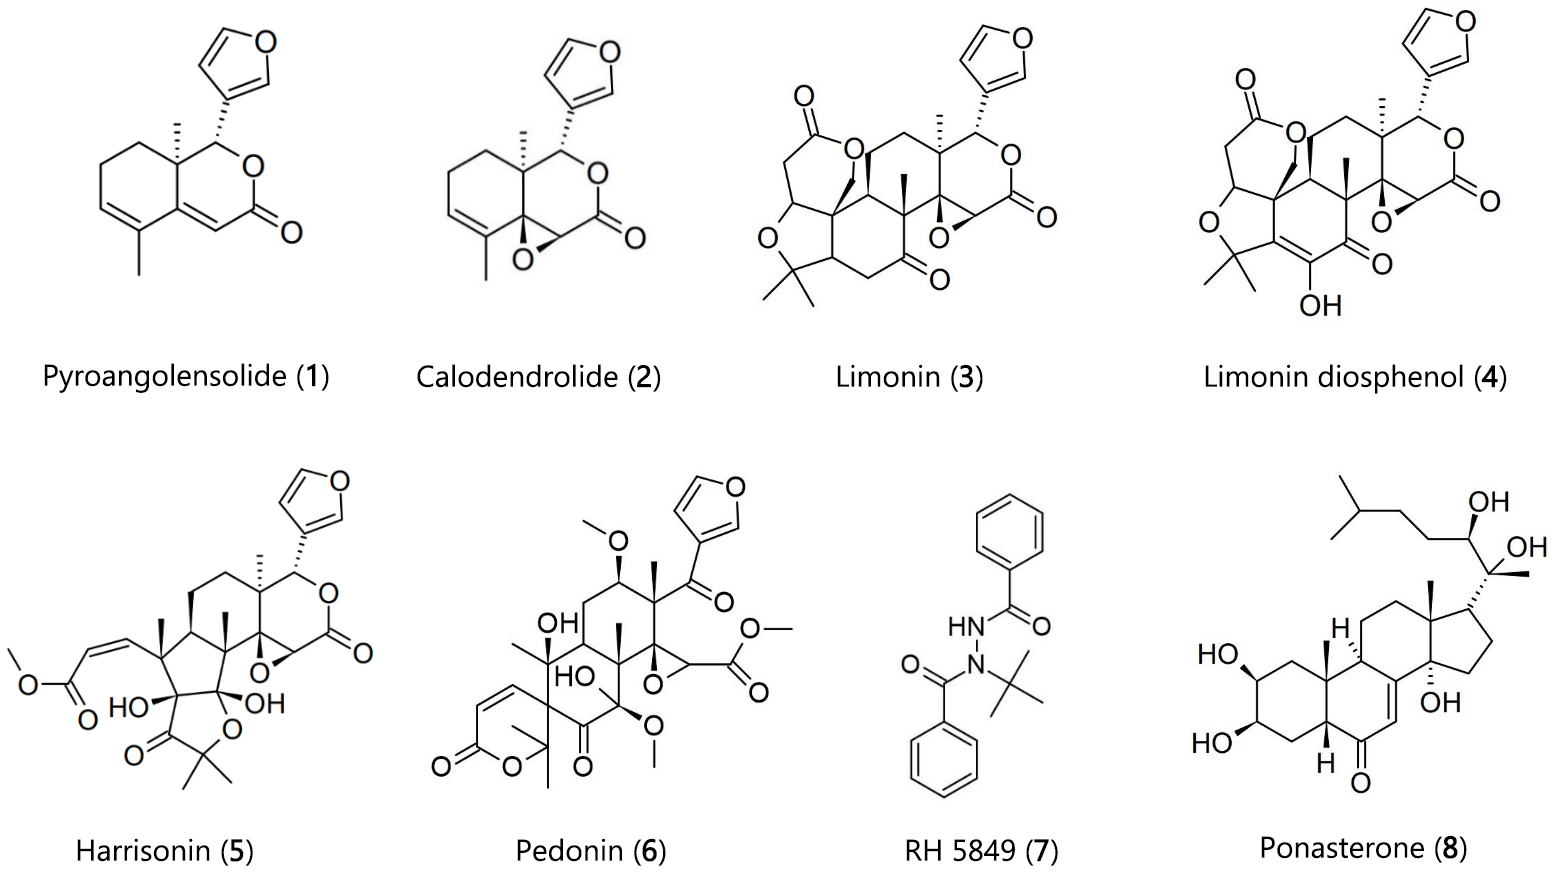 Figure 1. 2D structures of selected limonoids, RH 5849, and ponasterone A.